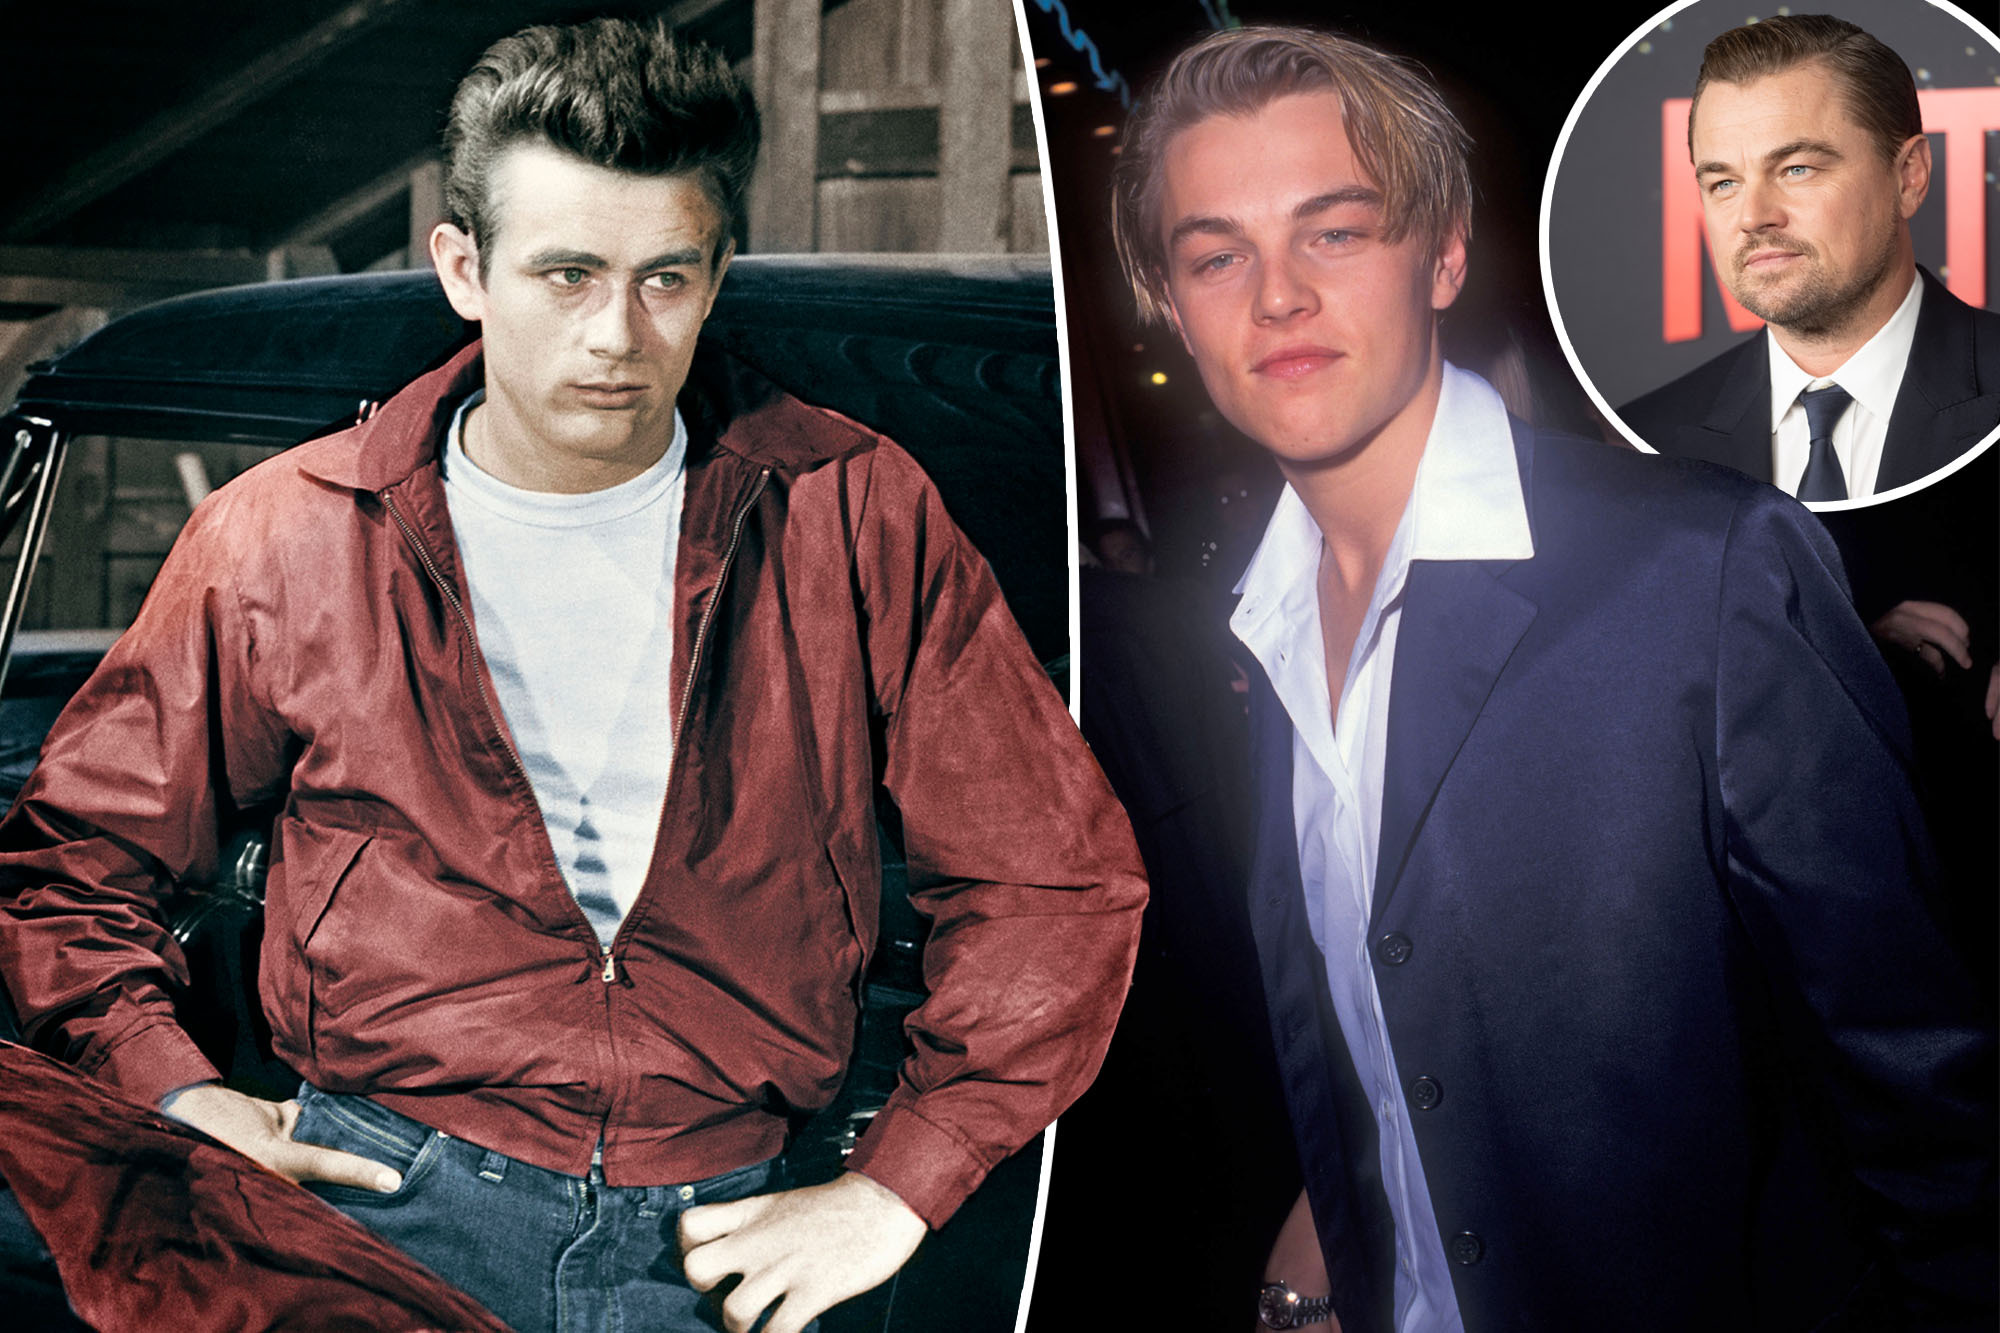 DiCaprio was Michael Mann's top choice to portray the "Rebel Without a Cause" actor in a biopic back in the 1990s.